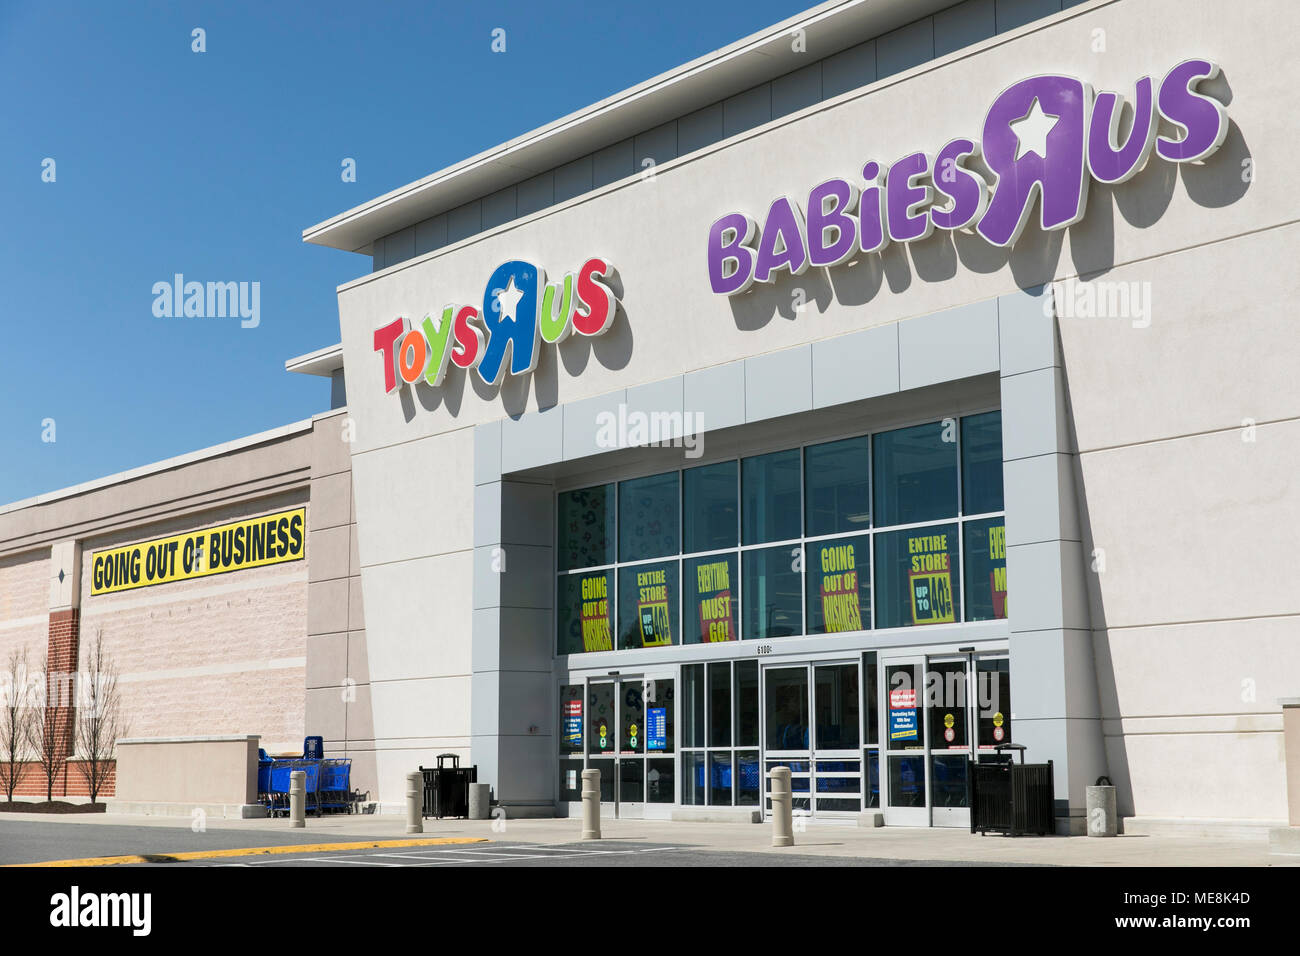 A logo sign outside of a joint Toys 'R' Us and Babies 'R' Us retail store in Columbia, Maryland with 'Going Out Of Business' signage on April 20, 2018 Stock Photo